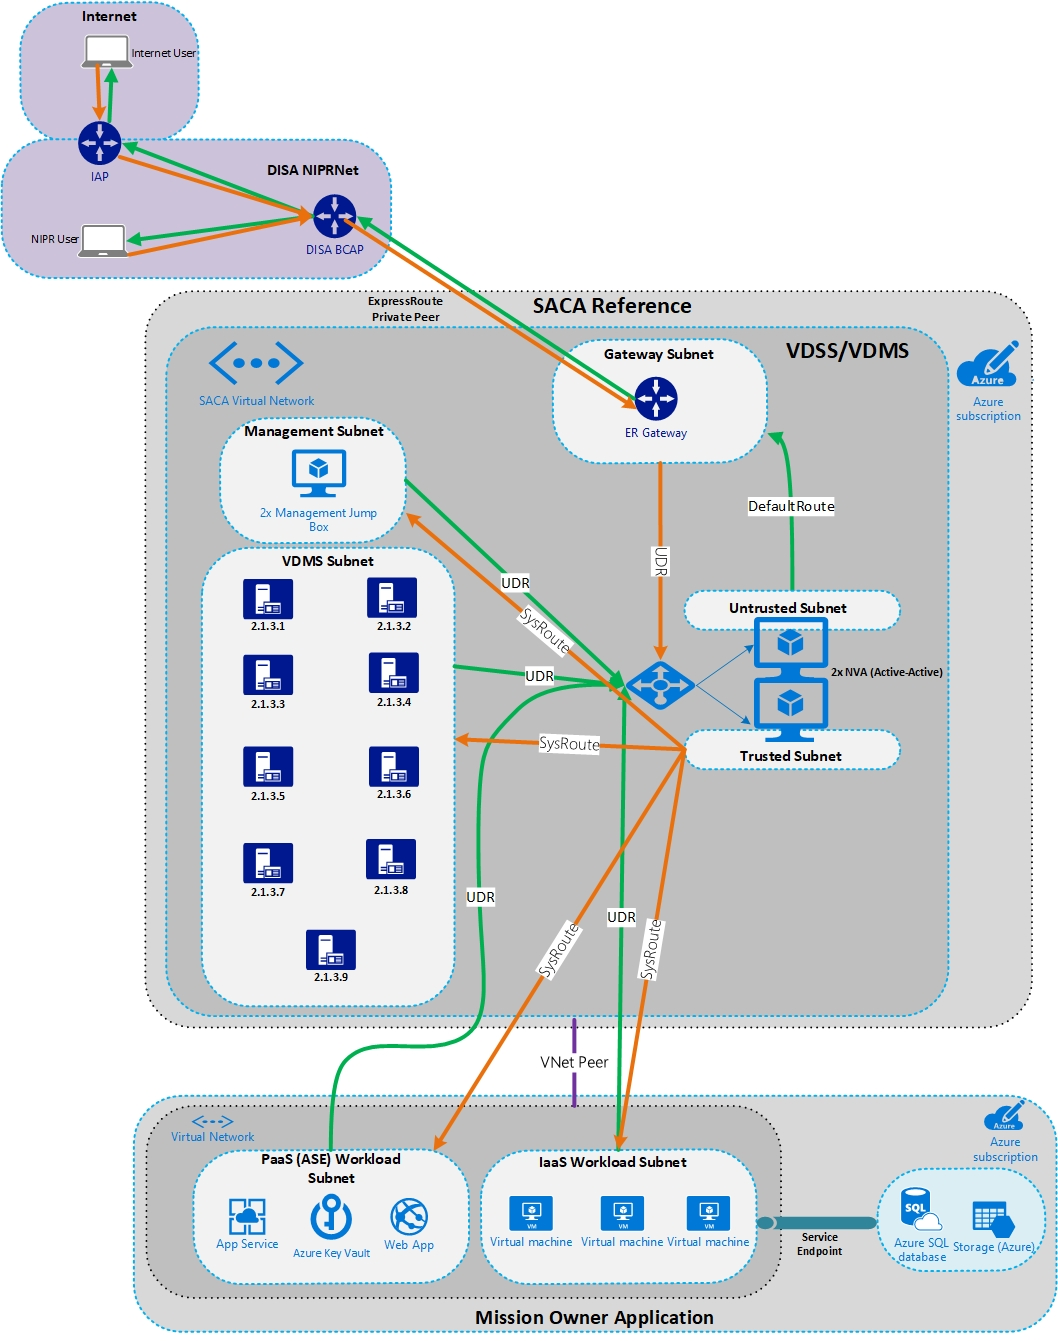 Architecture diagram that shows the VDSS and VDMS components colocated into a central virtual network.